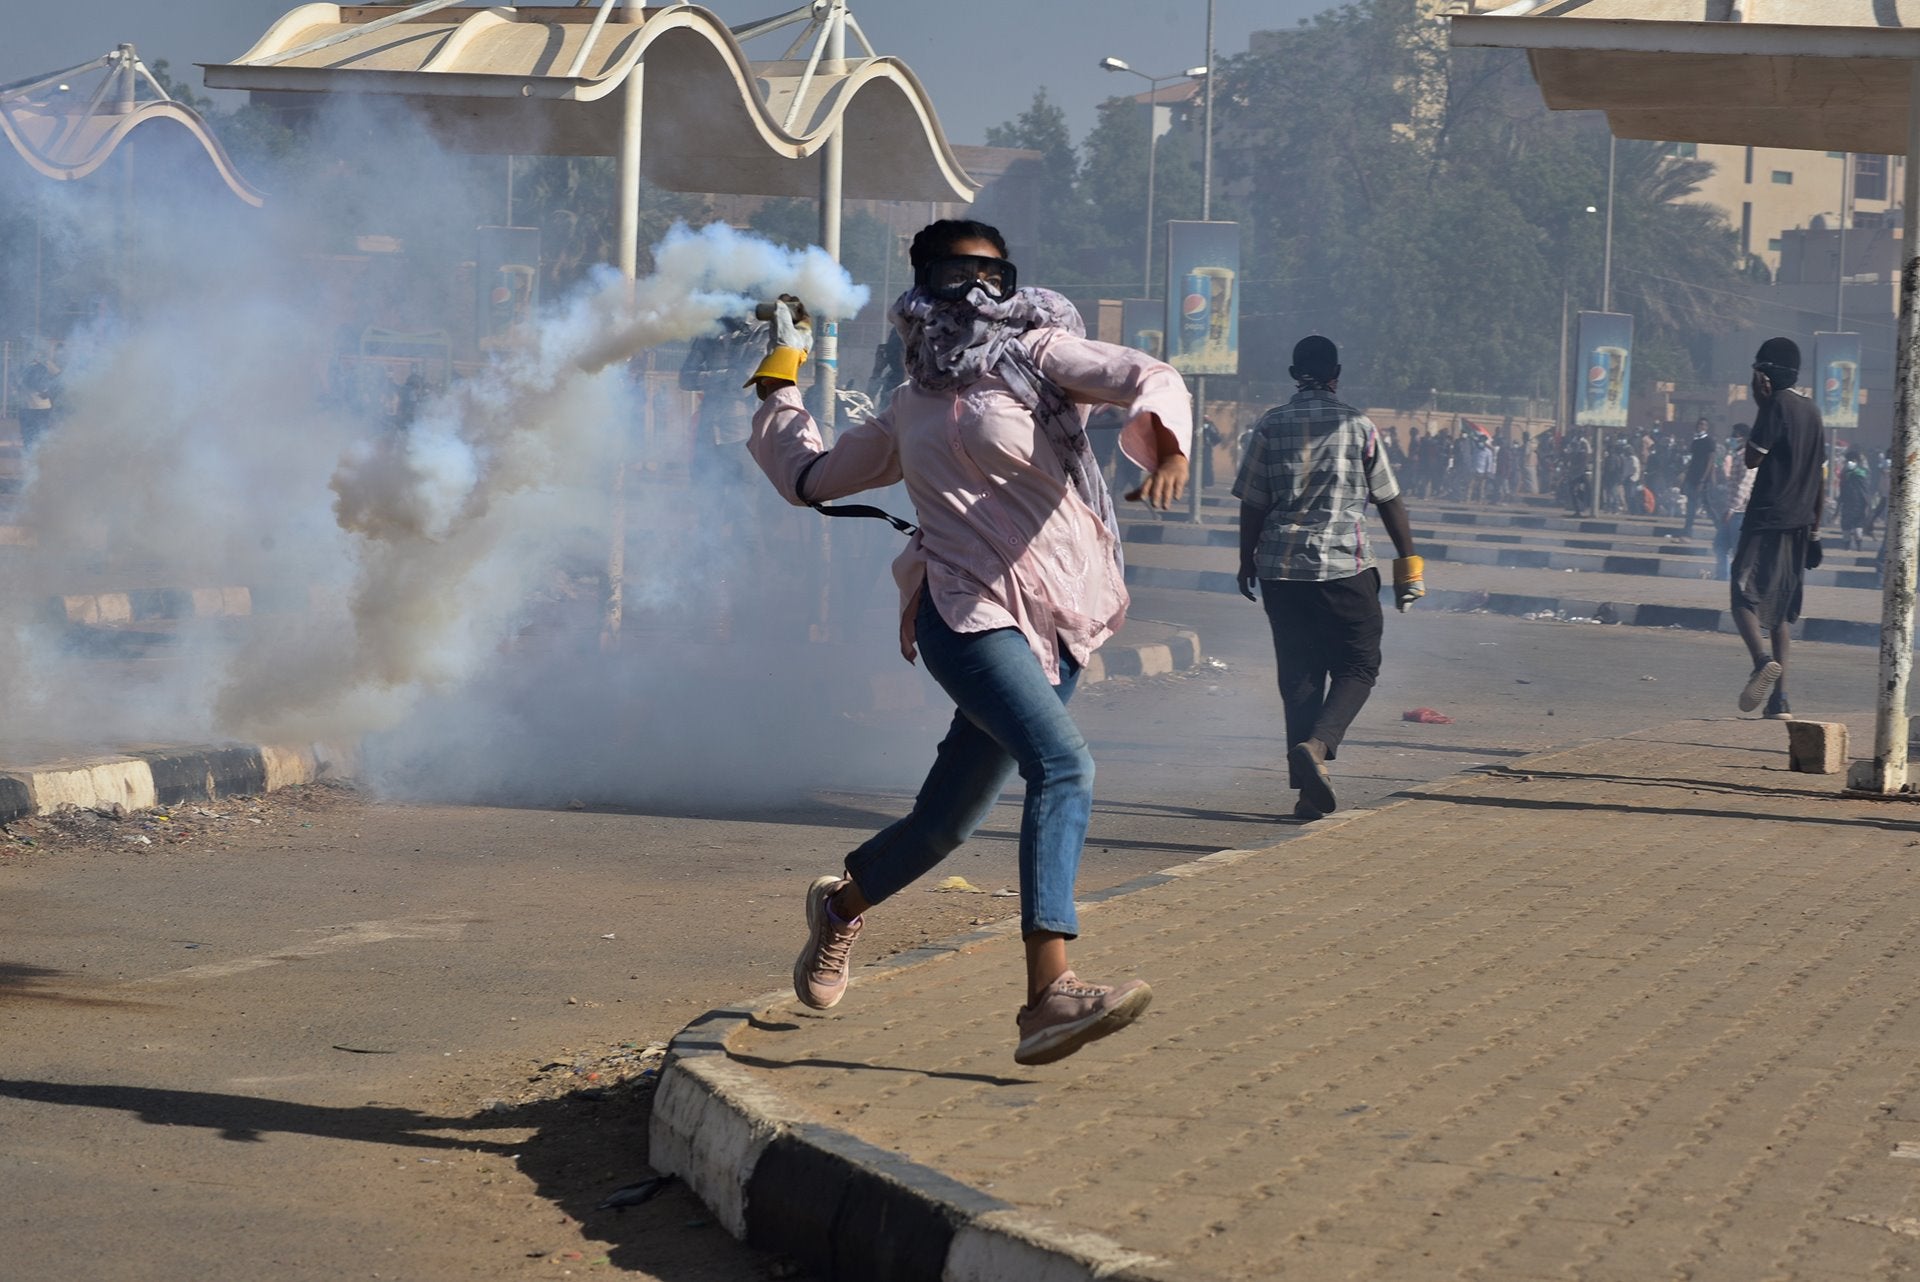 Sudanese photographer Faiz Abubakr Mohamed won the Singles category for this photo from a march demanding the end of military rule in the Sudanese capital Khartoum.